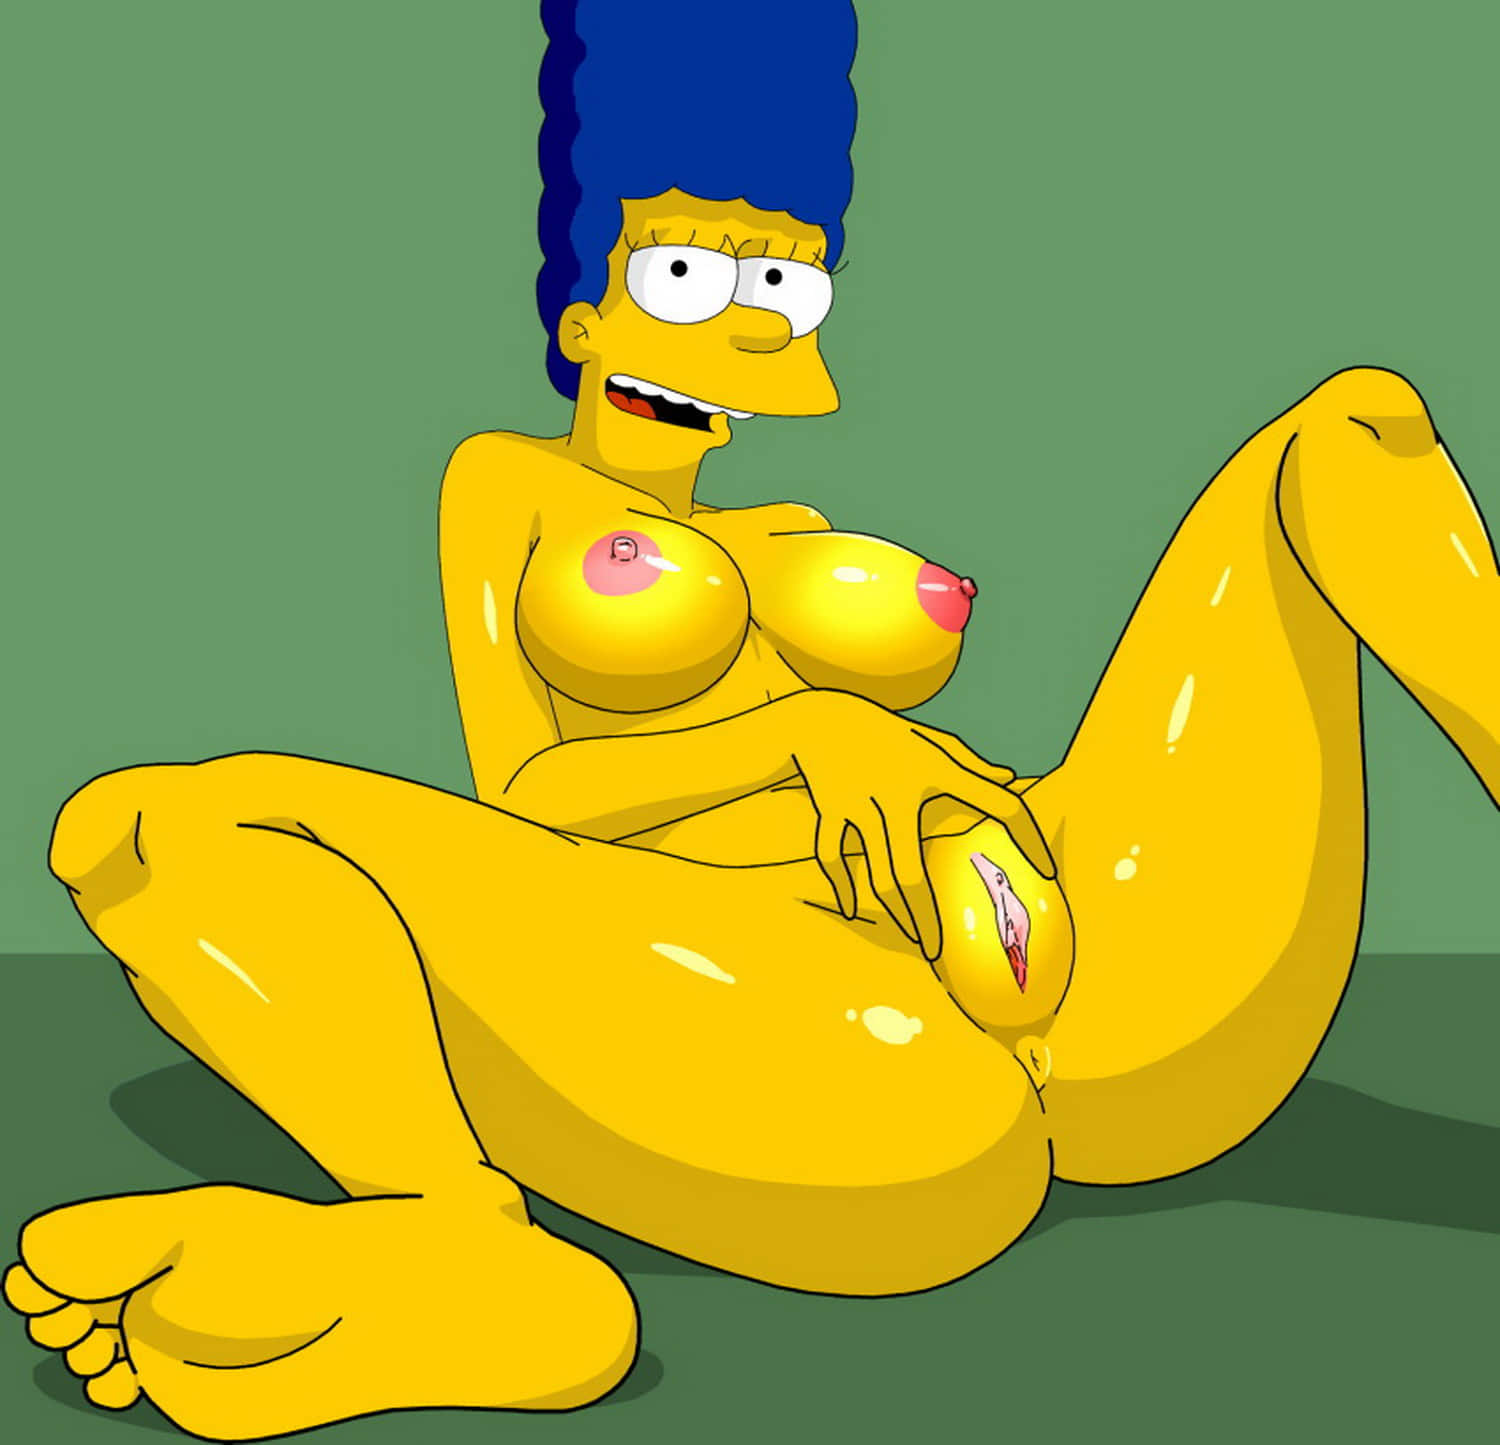 Nudist Pussy Spread - Marge Simpson Shaved Pussy Nude Spreading Pussy > Your Cartoon Porn